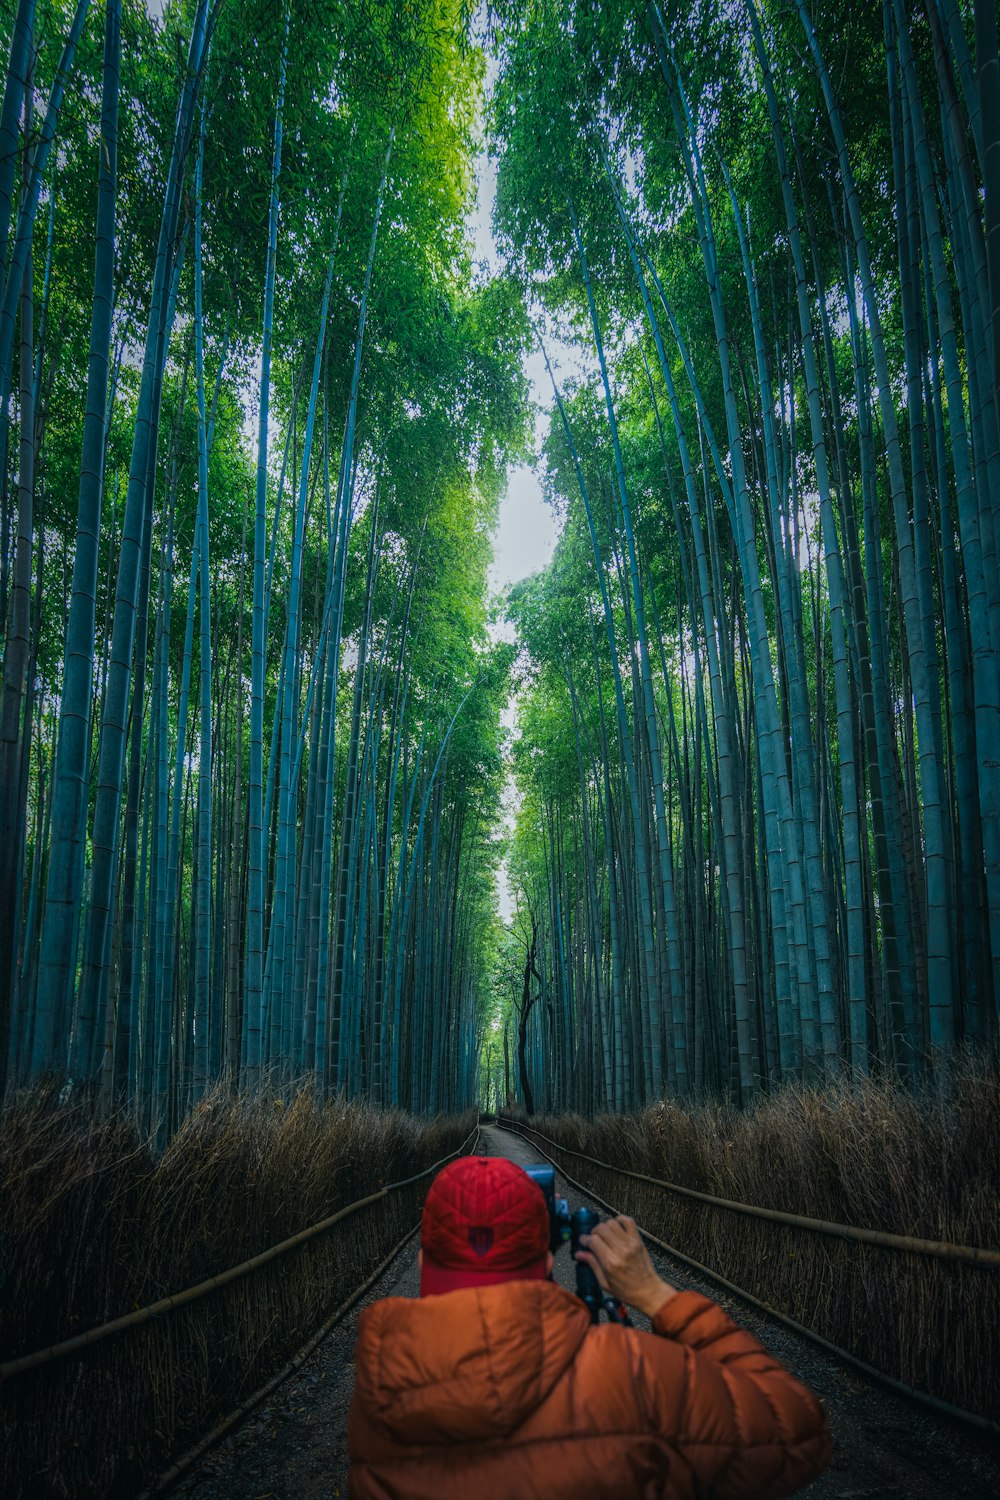 a person taking a picture of a bamboo forest